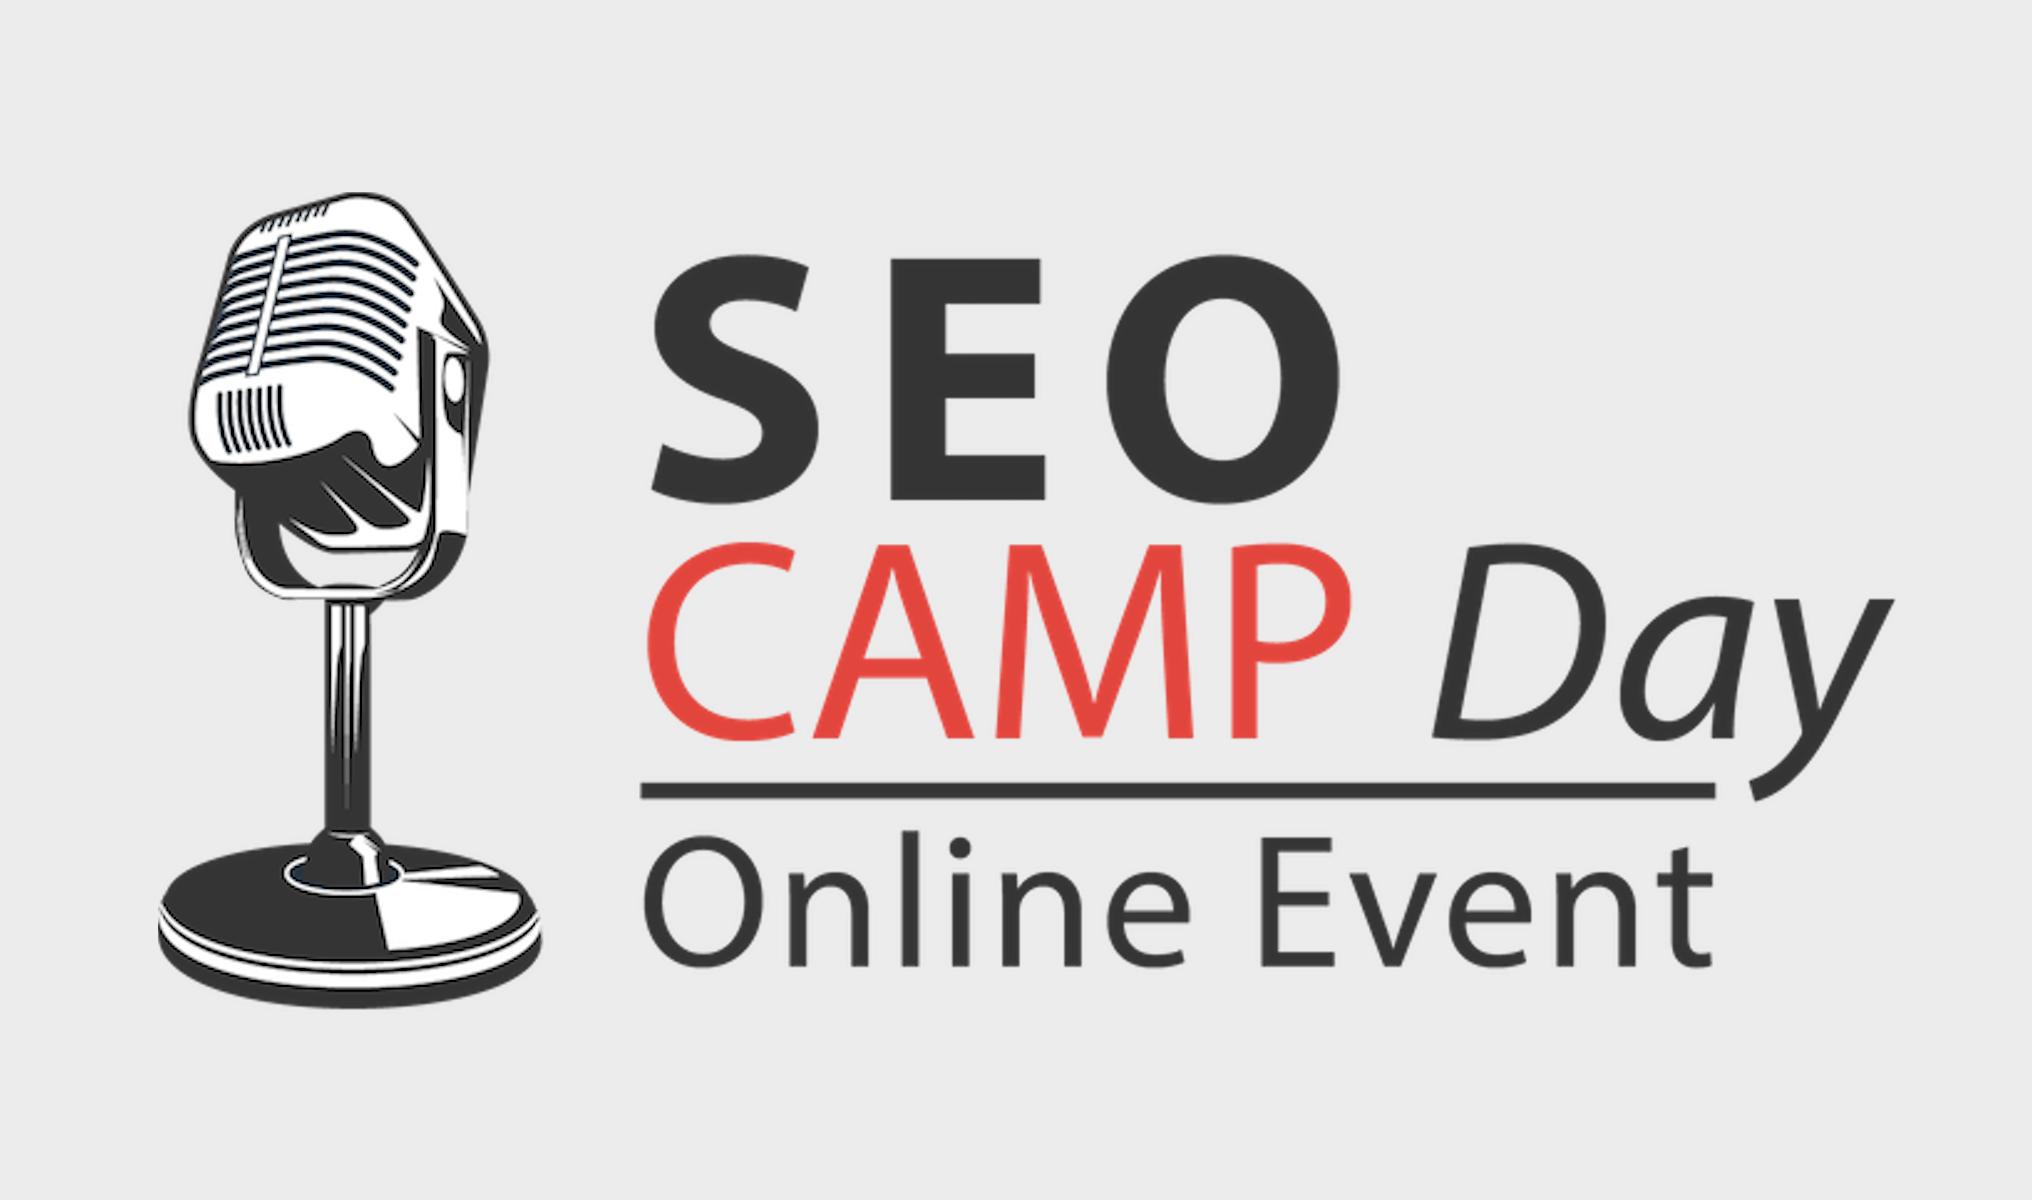 SEOCAMP DAY ONLINE EVENT